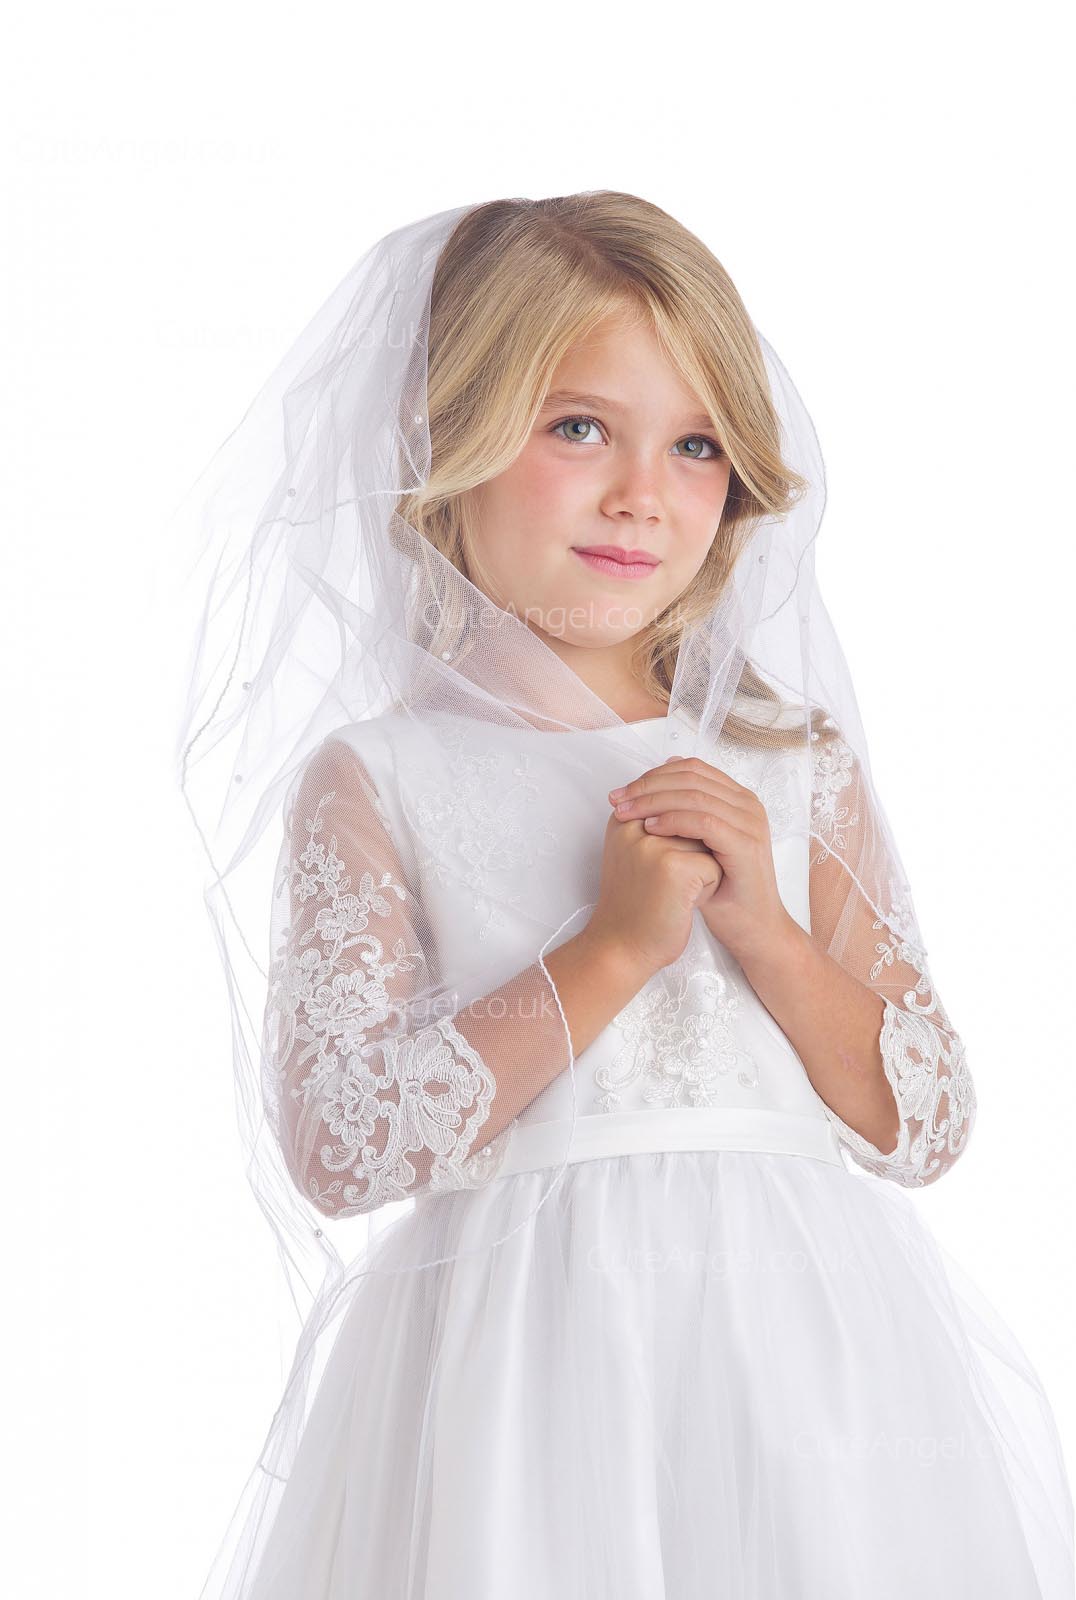 Girls Dress Style 066818 White Floor-length Lace Round A-line Dress in Choice of Colour